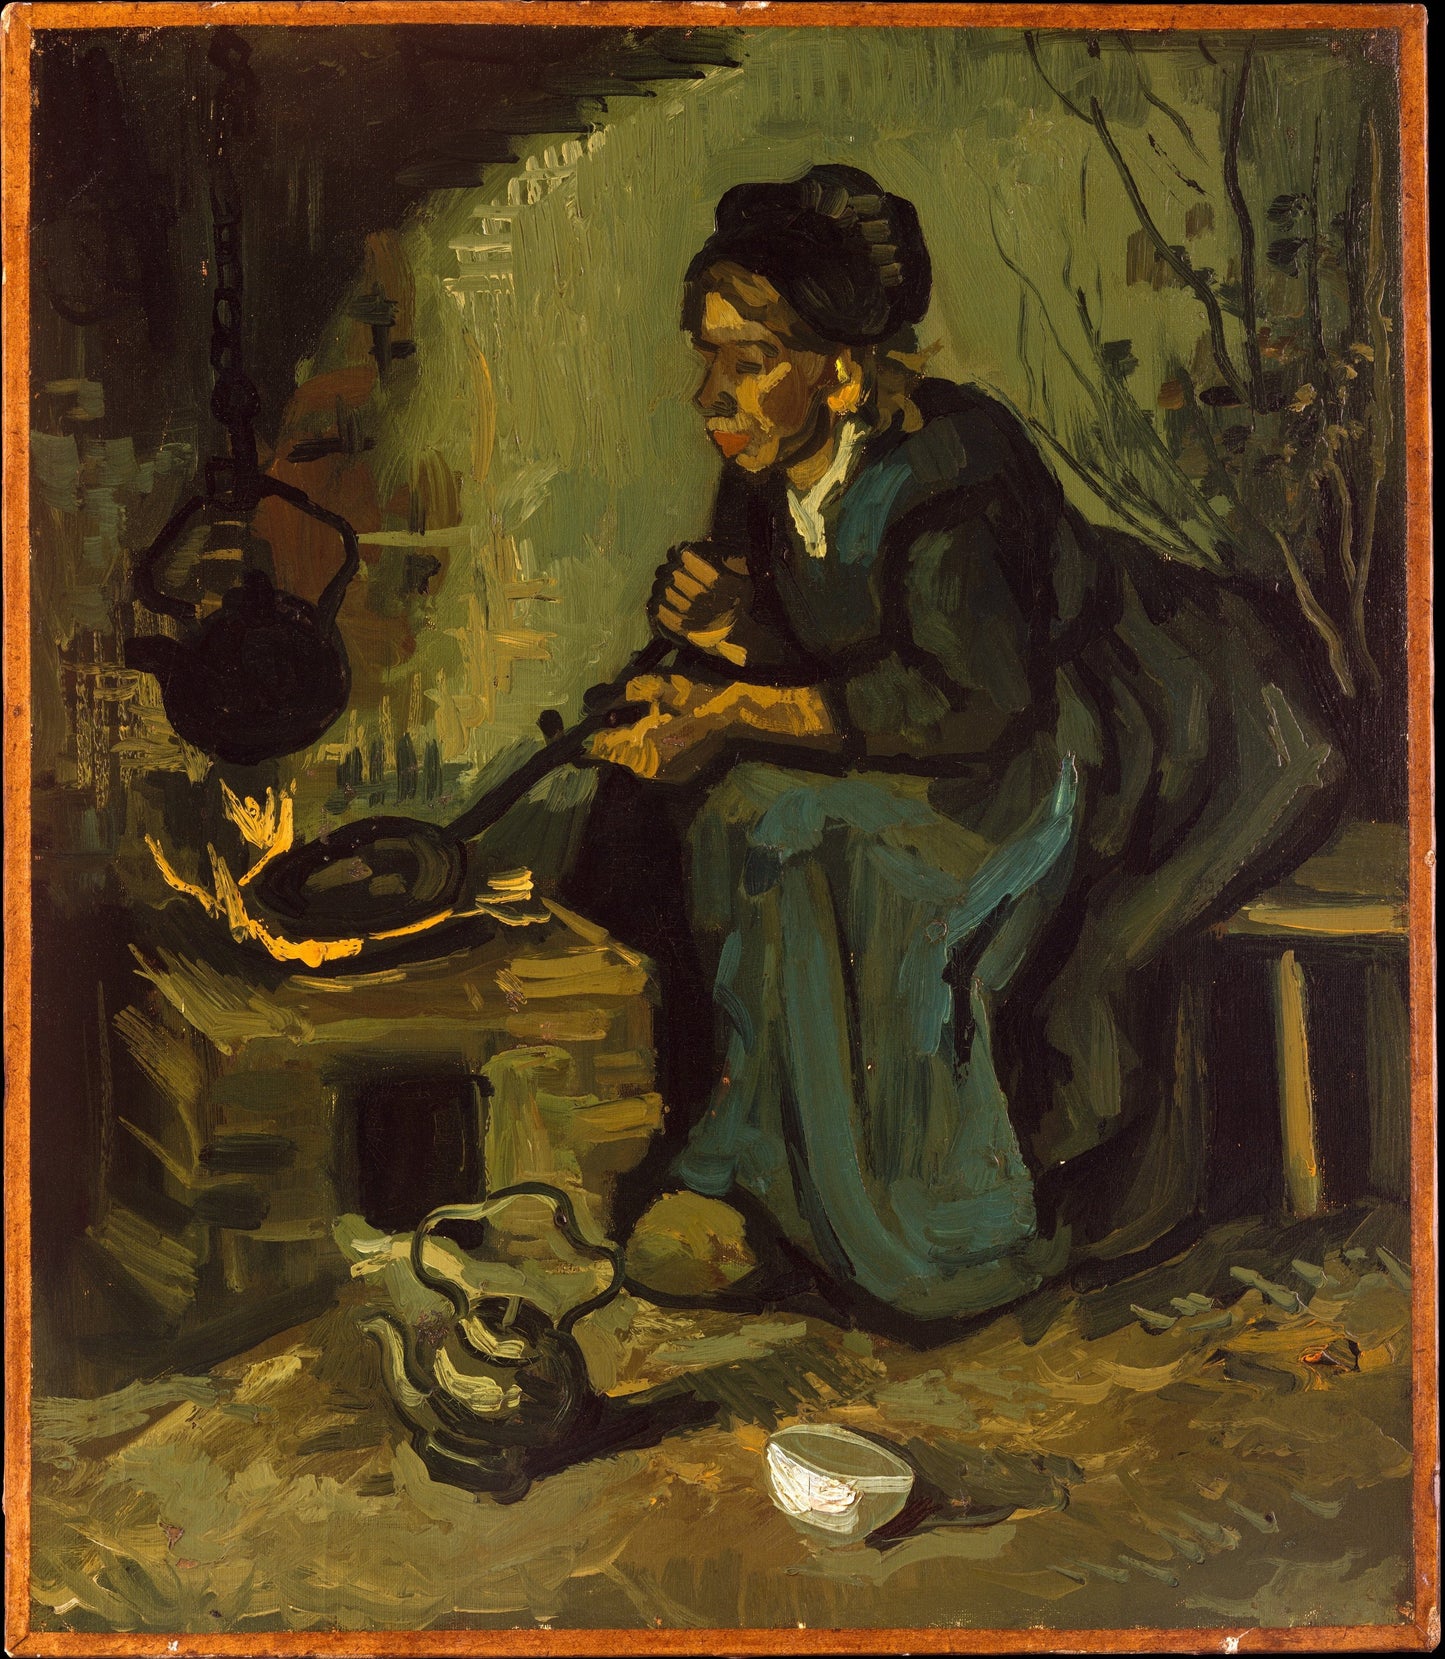 Peasant Woman Cooking by a Fireplace, 1885